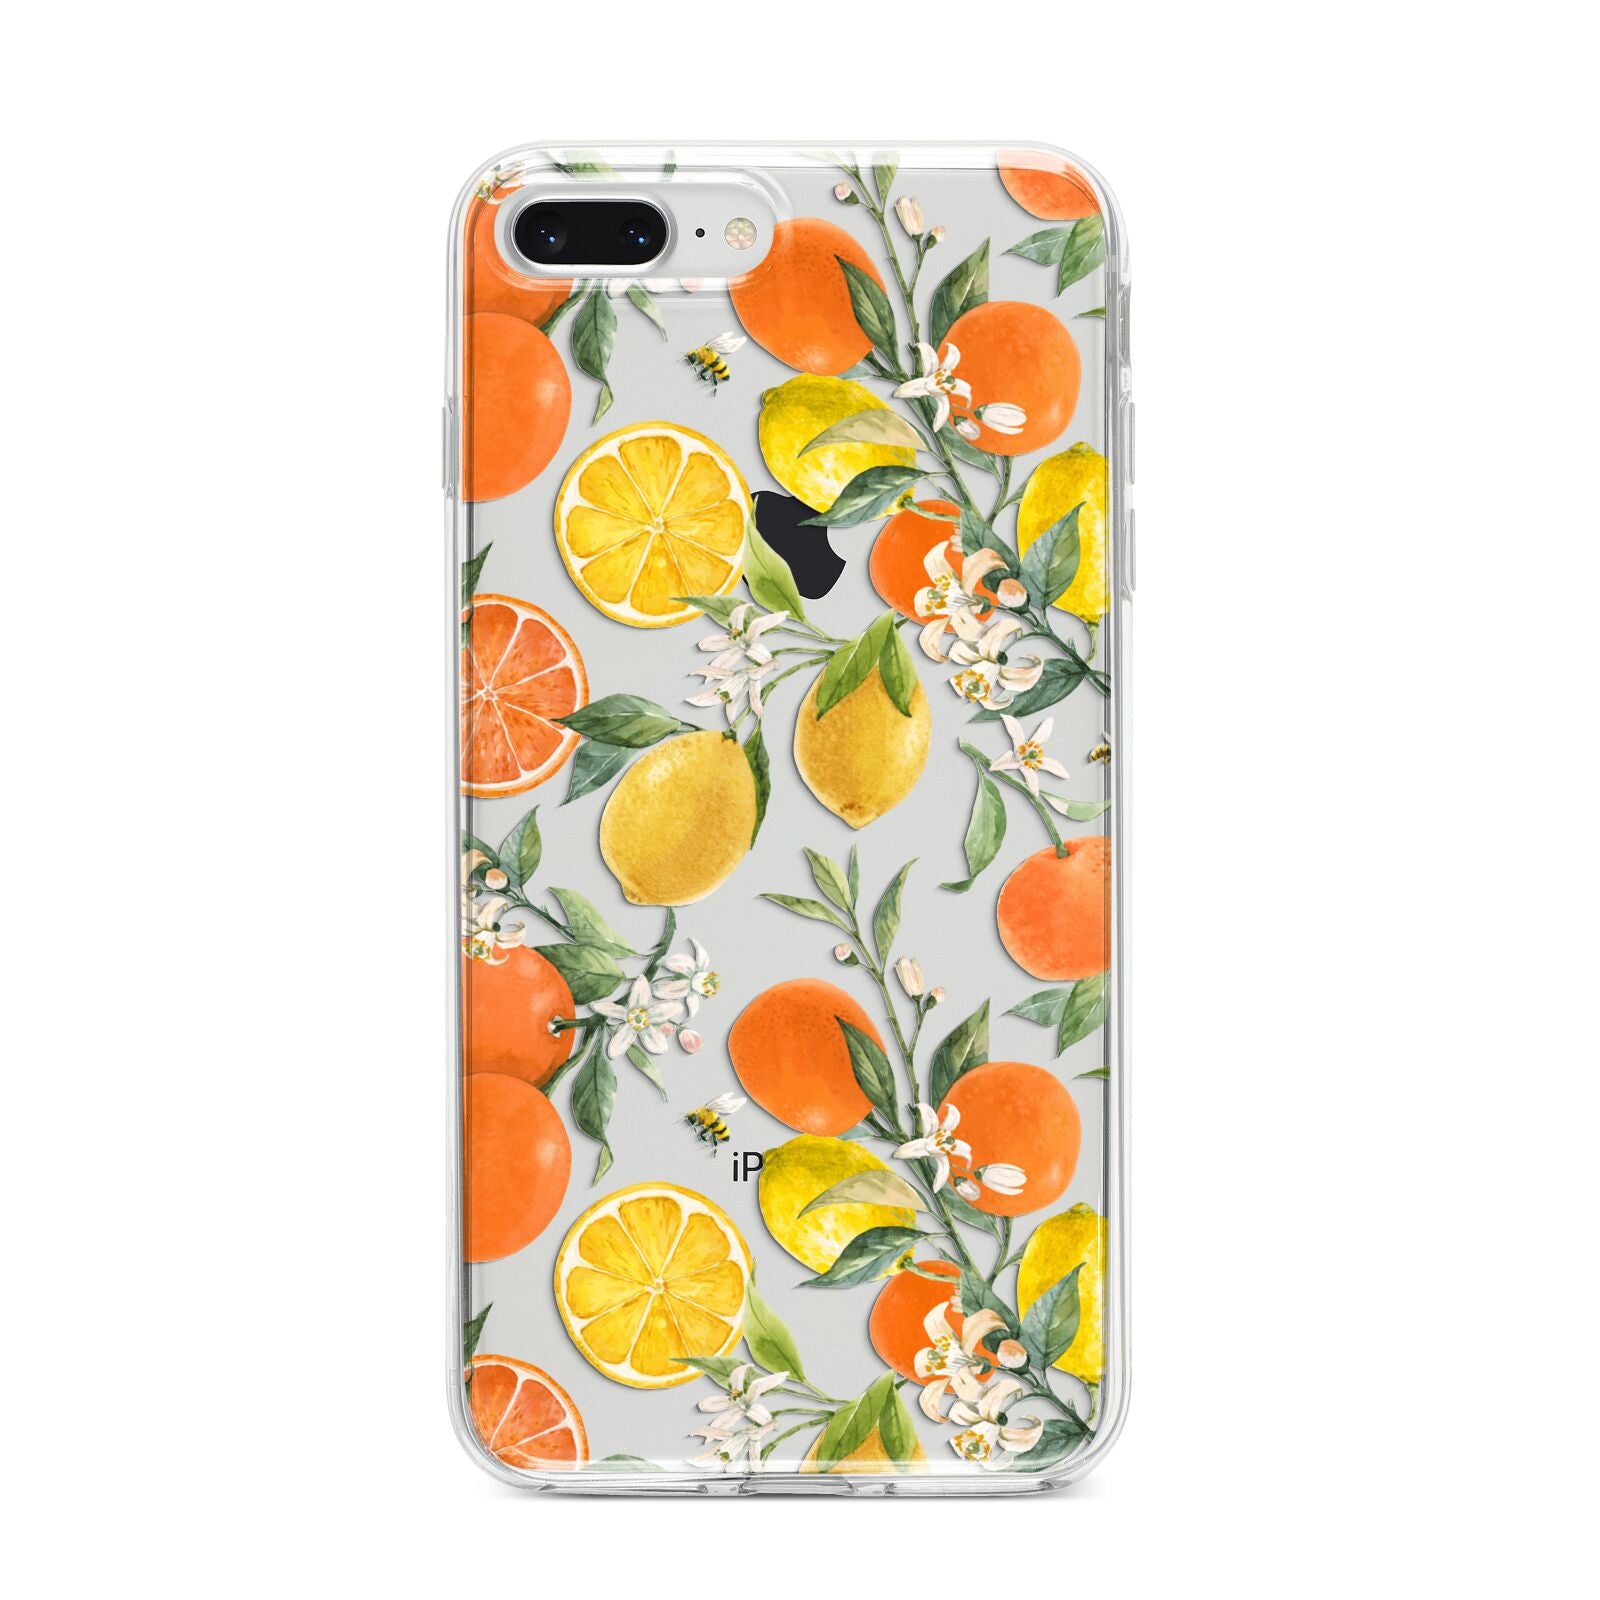 Lemons and Oranges iPhone 8 Plus Bumper Case on Silver iPhone